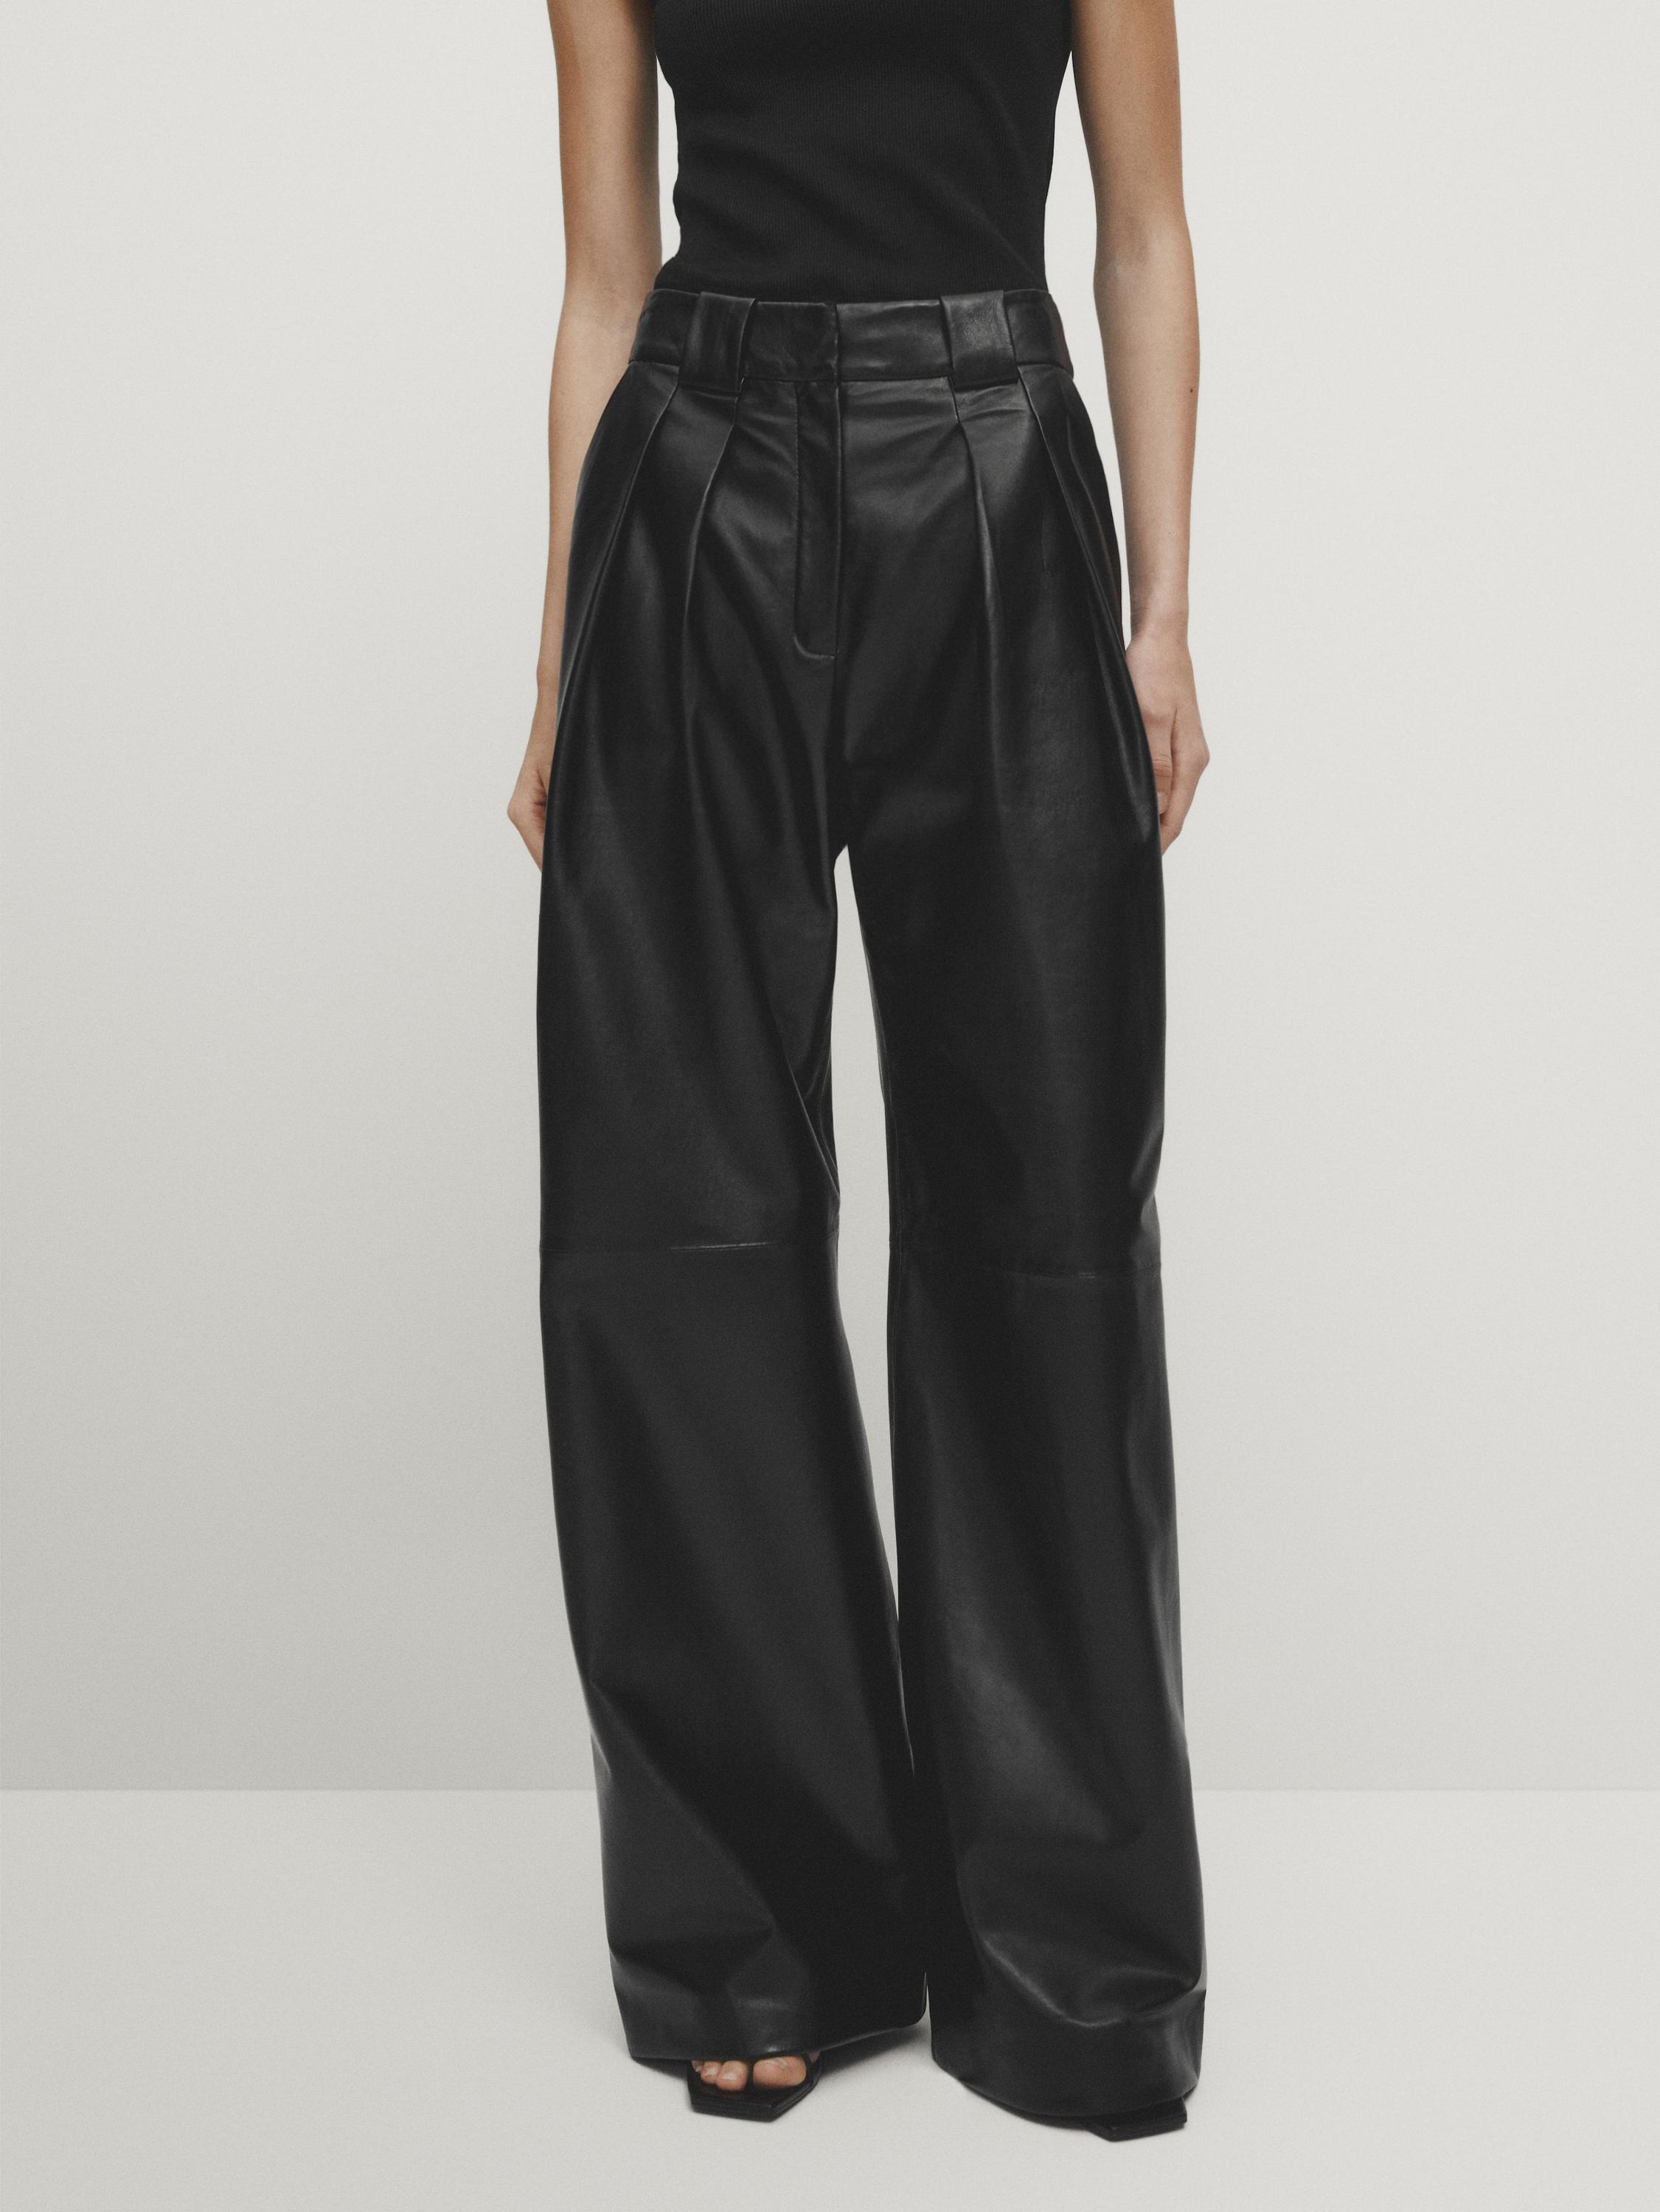 ZARA 100% SHEEP LEATHER FLARED LEATHER TROUSERS LIMITED EDITION XS -  2154/240